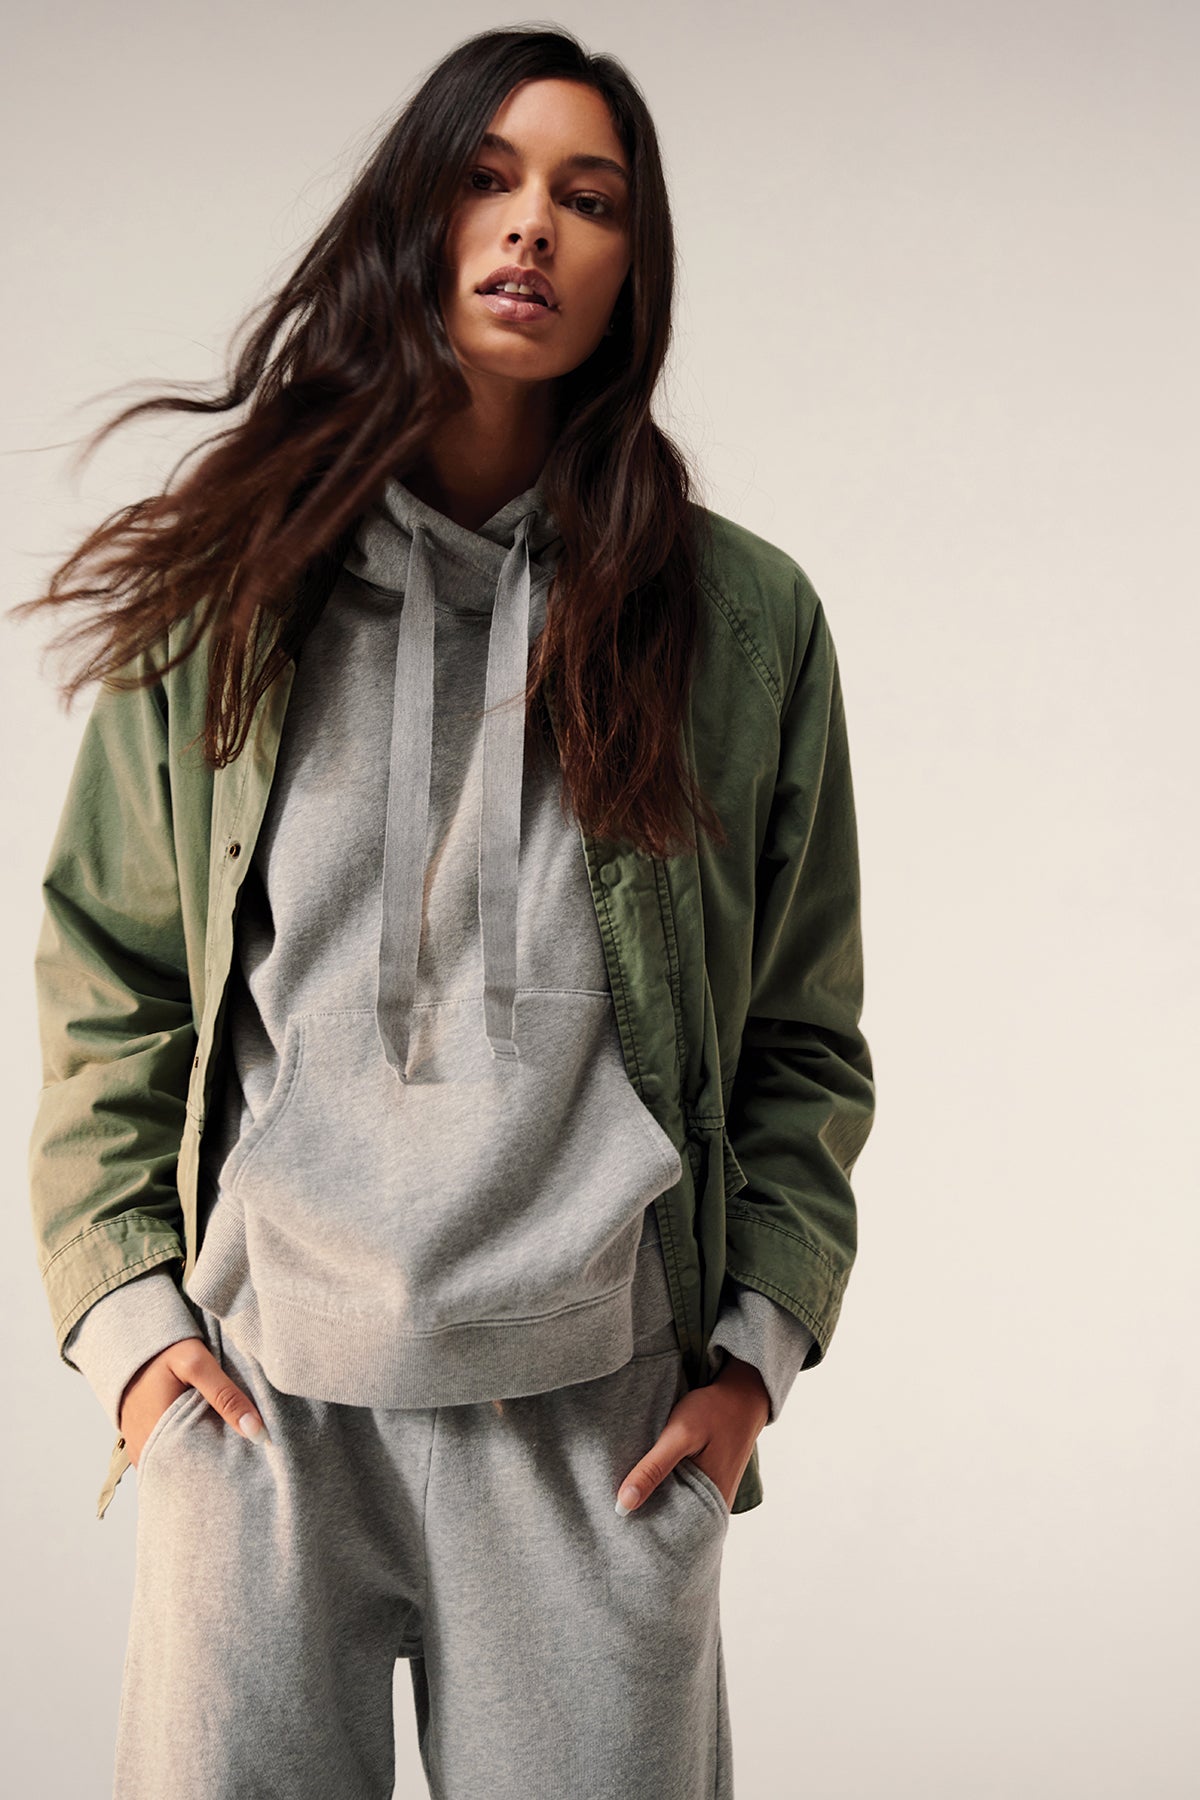 Melrose Jacket Army with Ojai Hoodie Heather Gray and Zuma Sweatpant Heather Grey Front-22854049628353